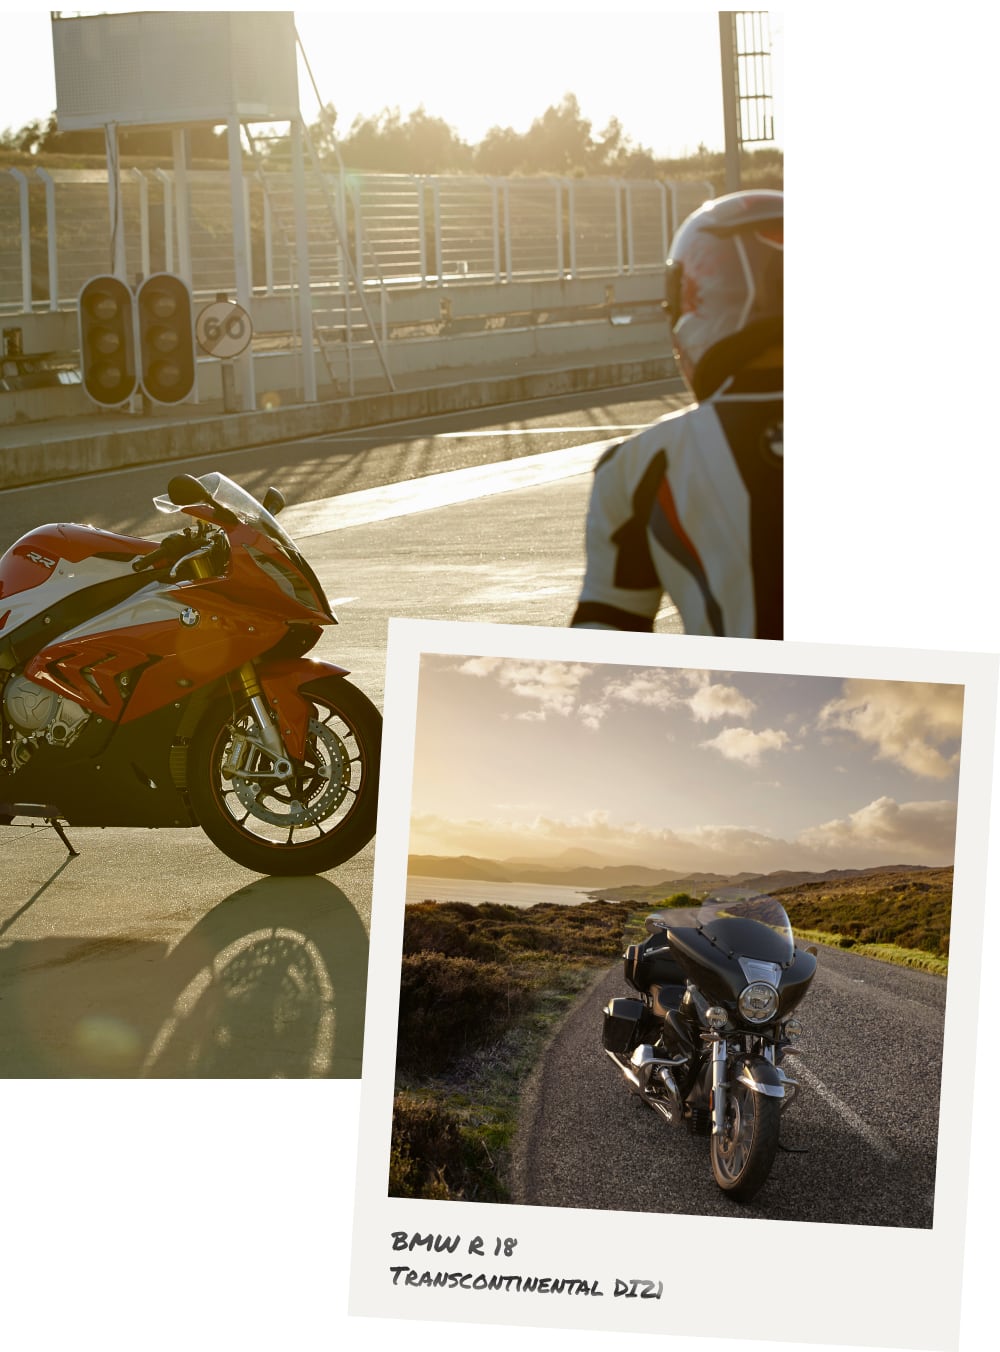 Collage of motorcyclist and bike outside race track and image of BMW R 18 Transcontinental DI21